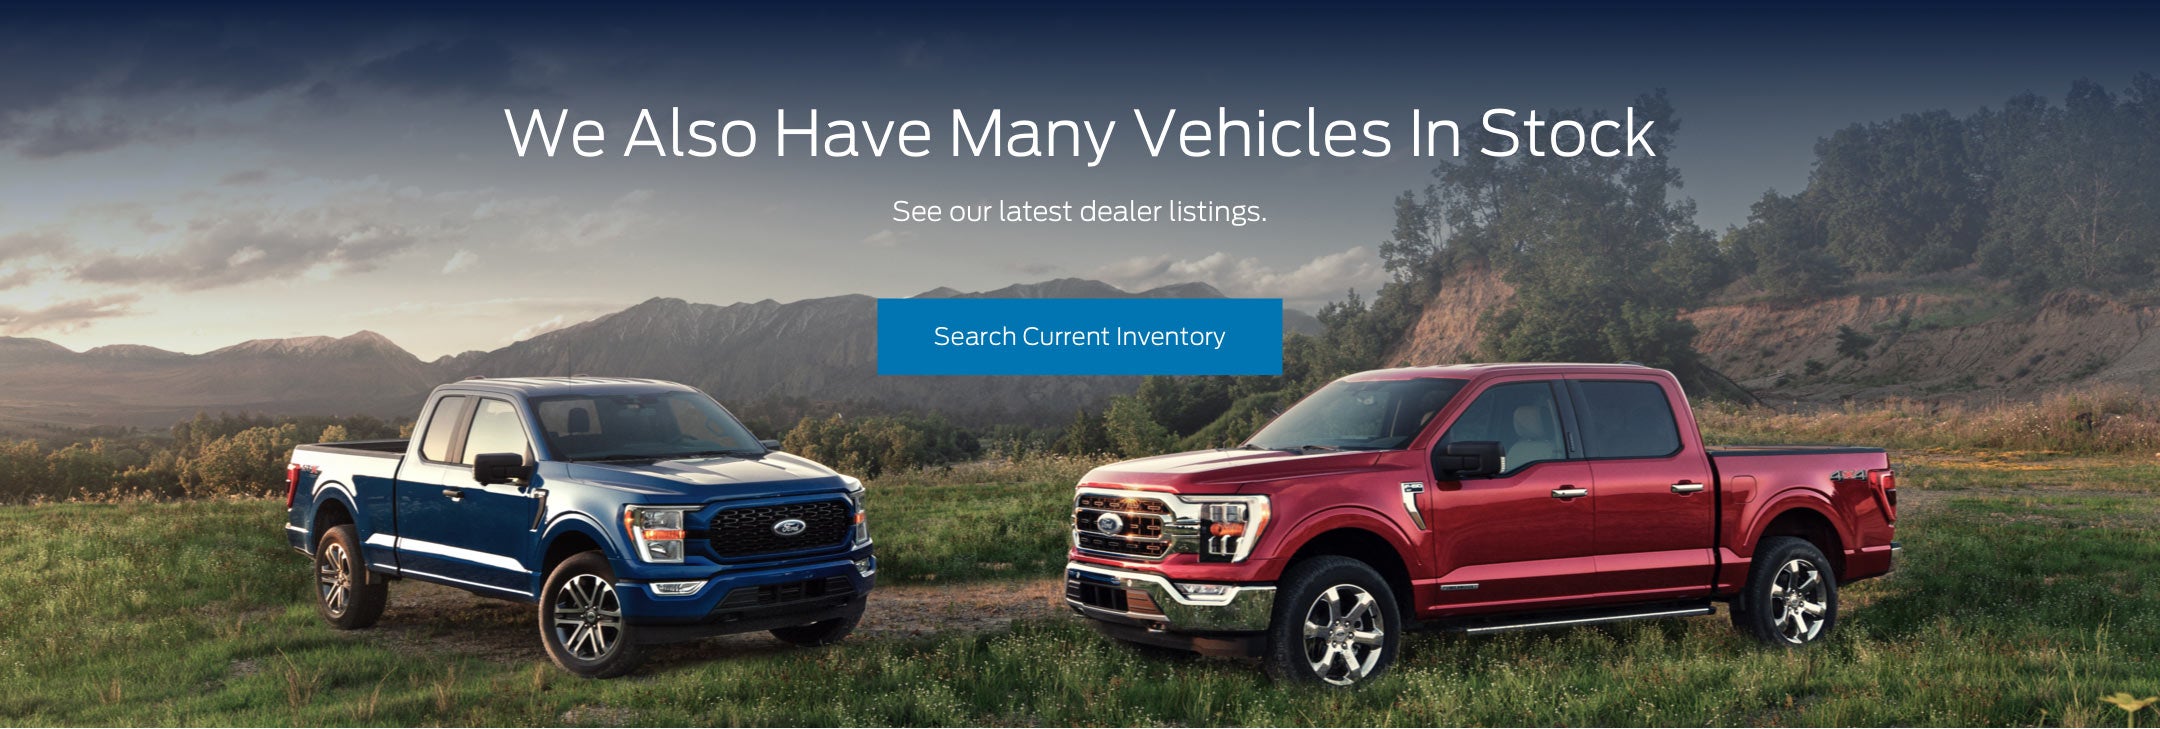 Ford vehicles in stock | McCombs Ford West in San Antonio TX